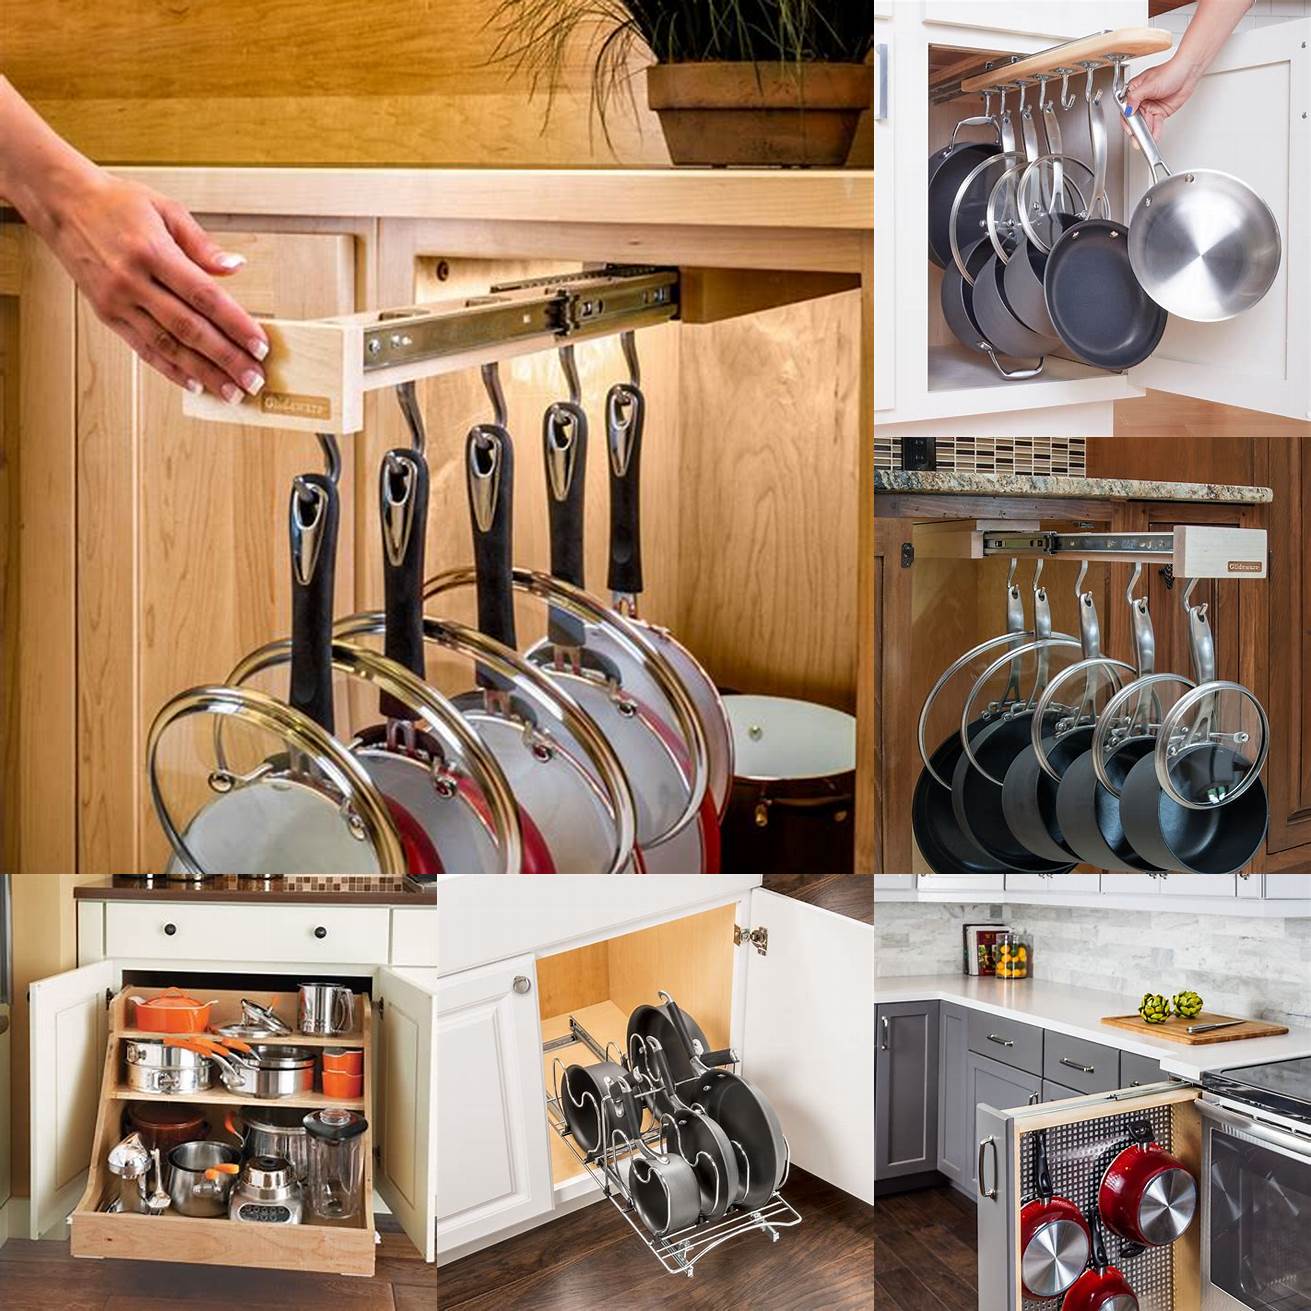 Pull-out organizer for pots and pans